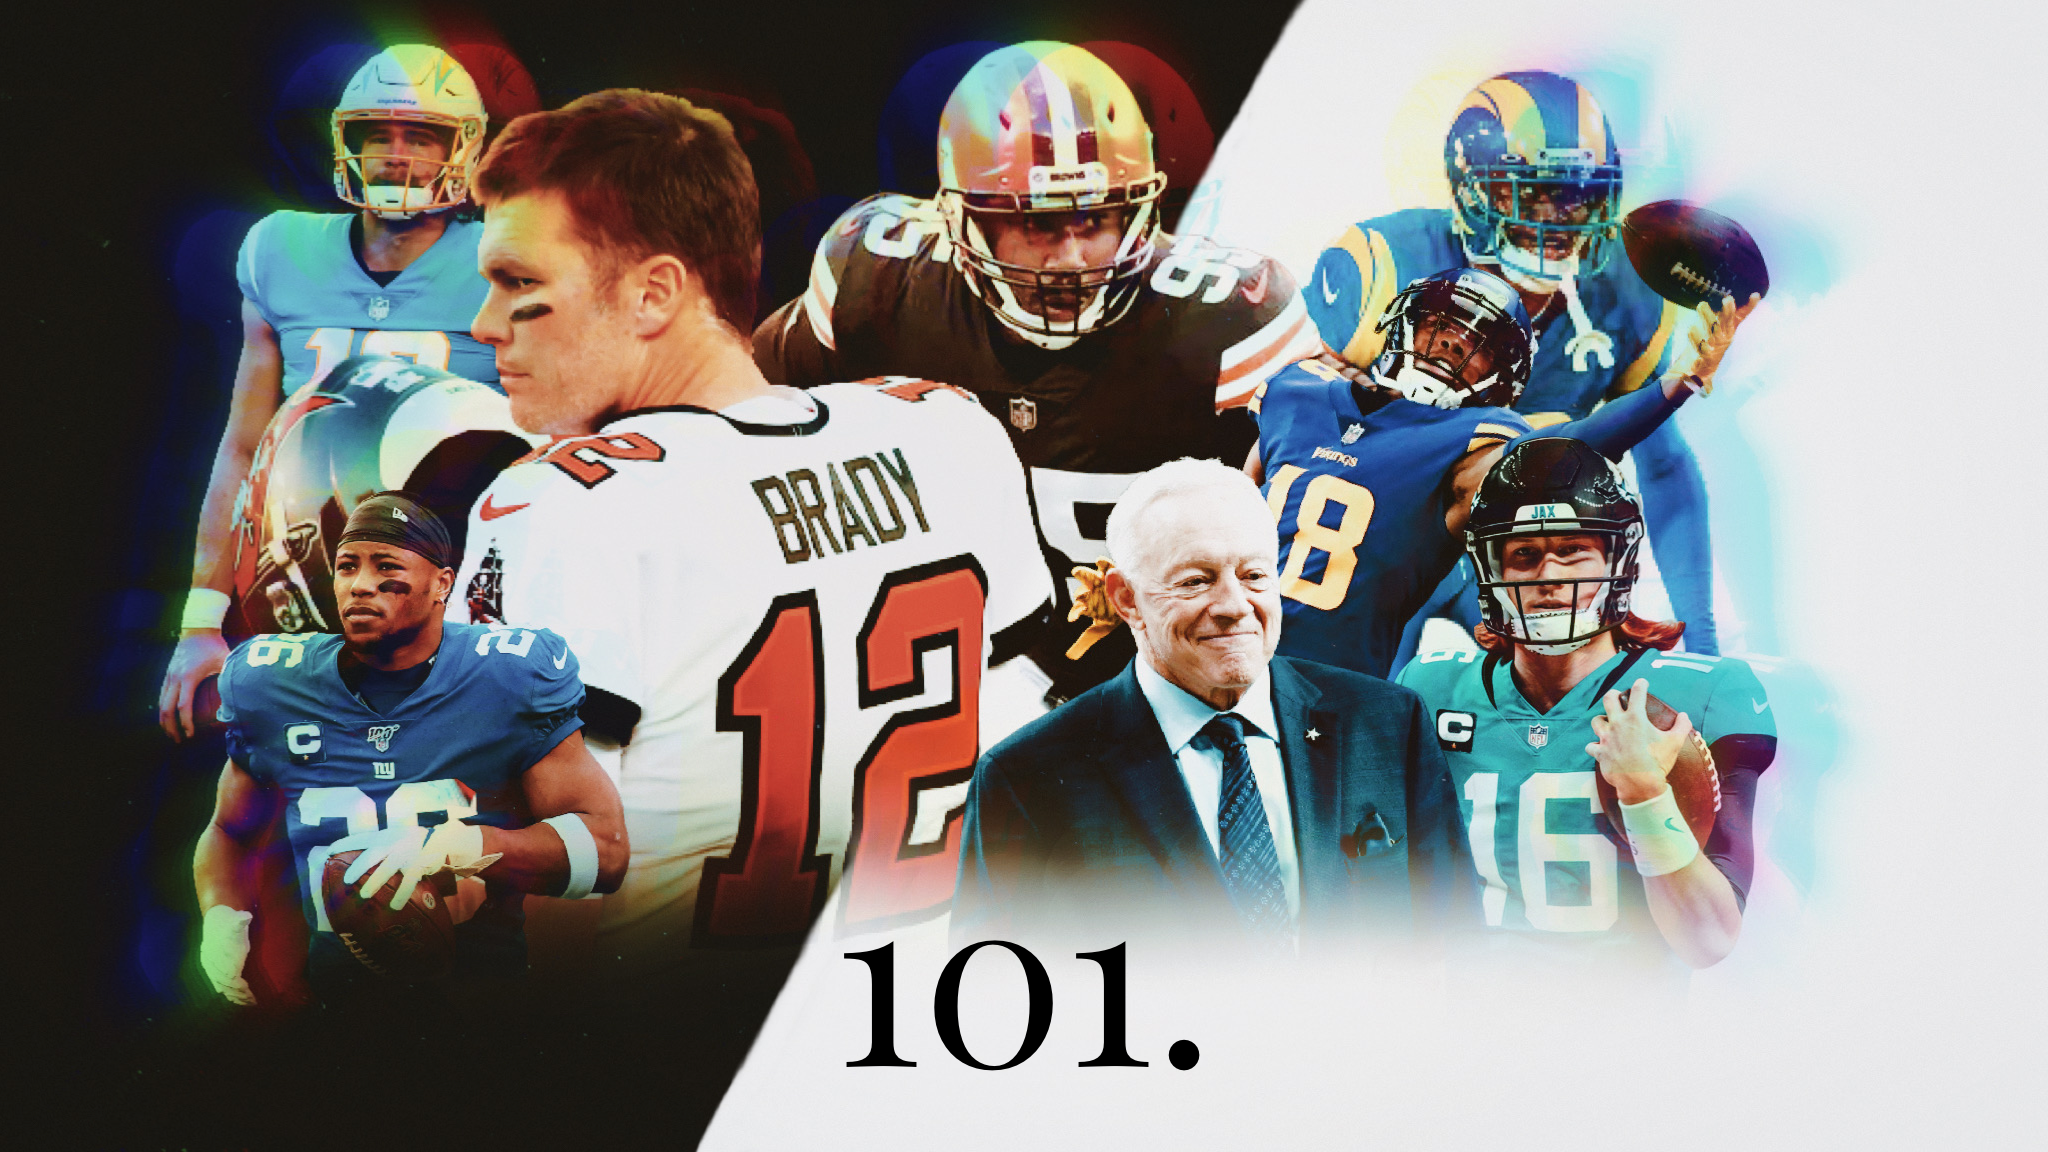 A graphic with the best players in the NFL are shown in honor of the writer's 101 facts of the upcoming season.